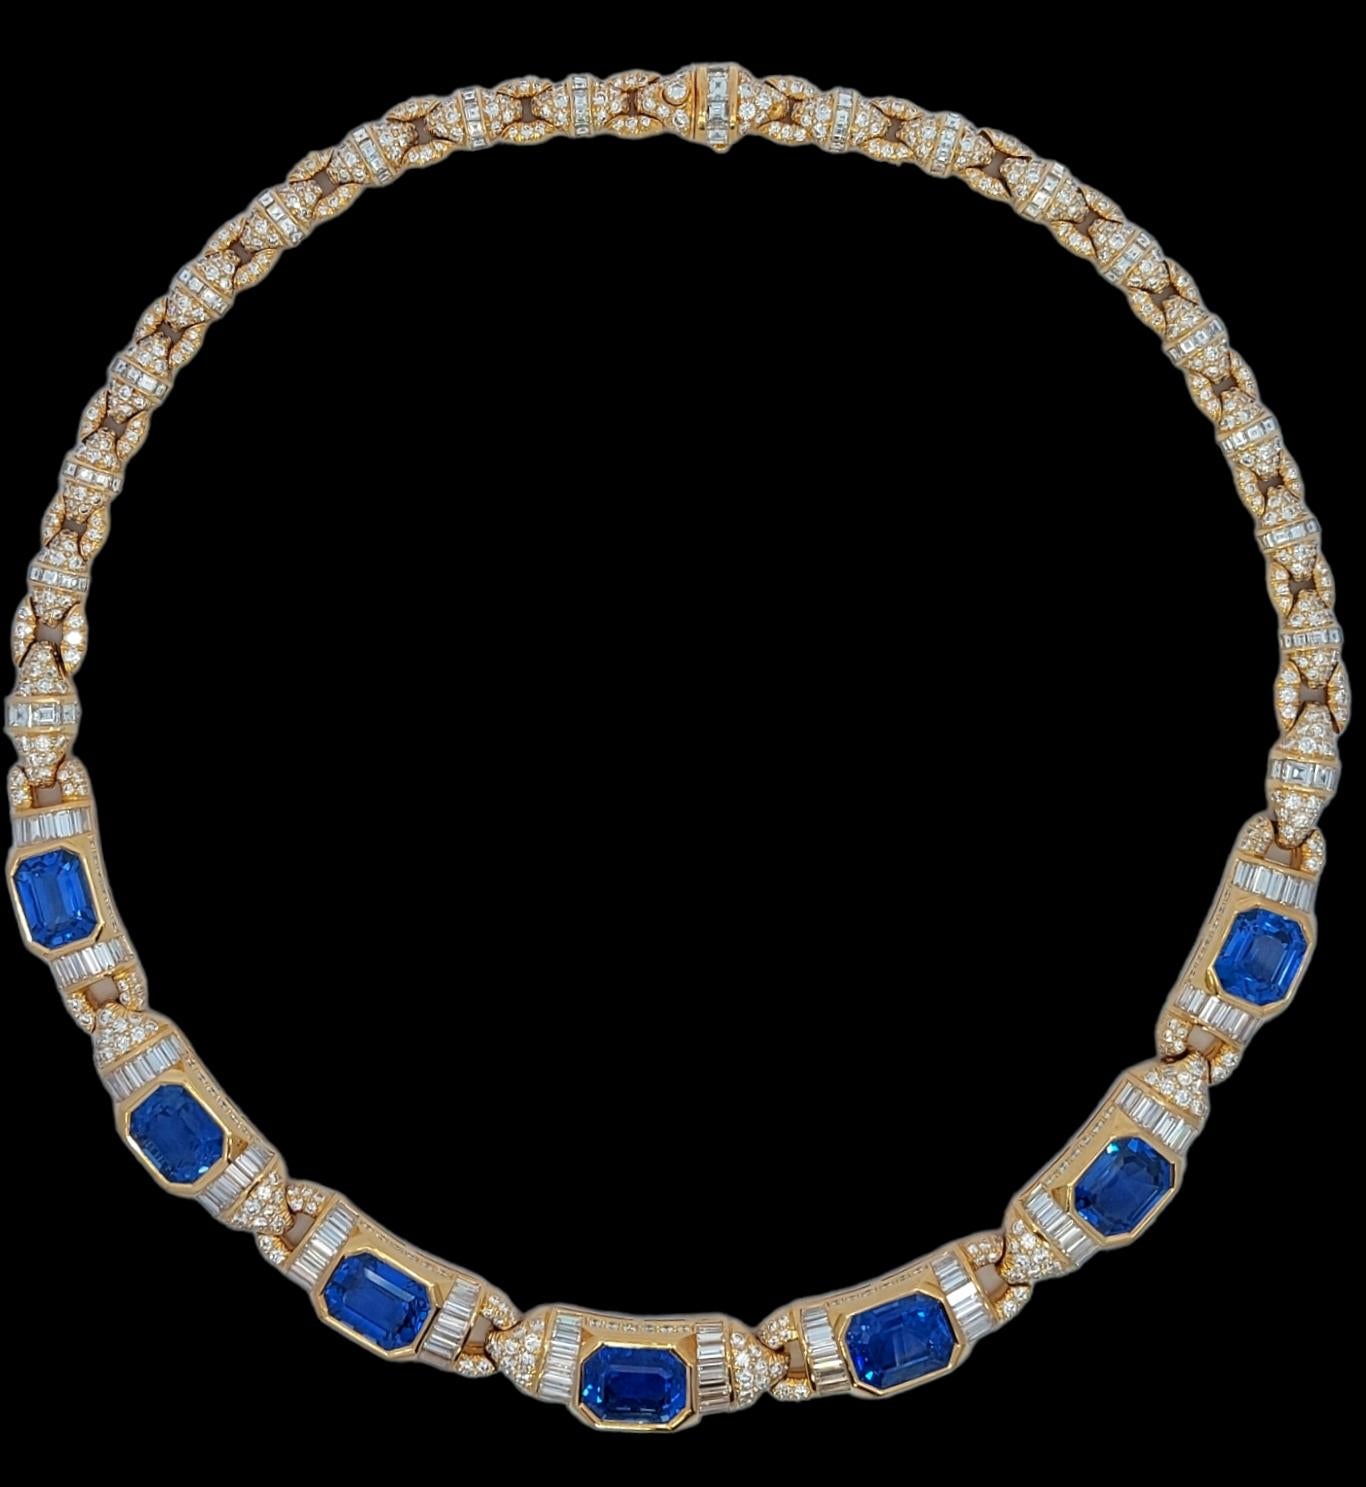 GRS Certified Magnificent 18kt Yellow Gold Necklace with 41.6 ct Unheated Sapphires and Diamonds from the Estate 
of his Majesty Qaboos bin Said

Qaboos bin Said Al Said was Sultan of Oman from 23 July 1970 until his death in 2020

Unique &